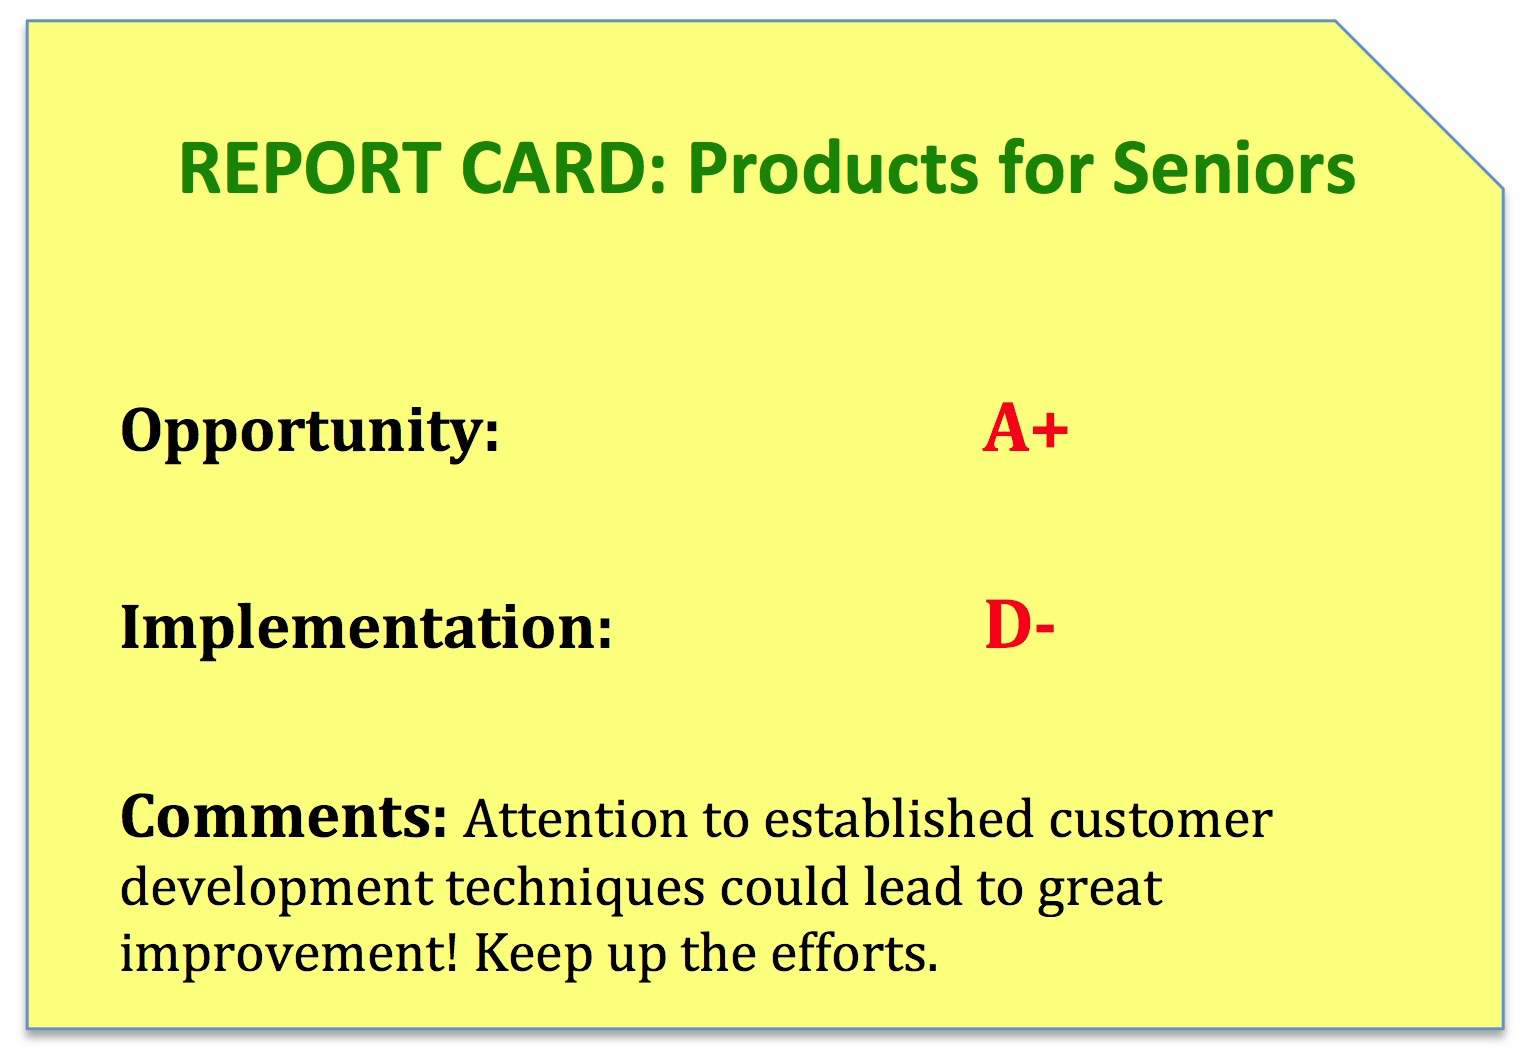 Products for Seniors: report card